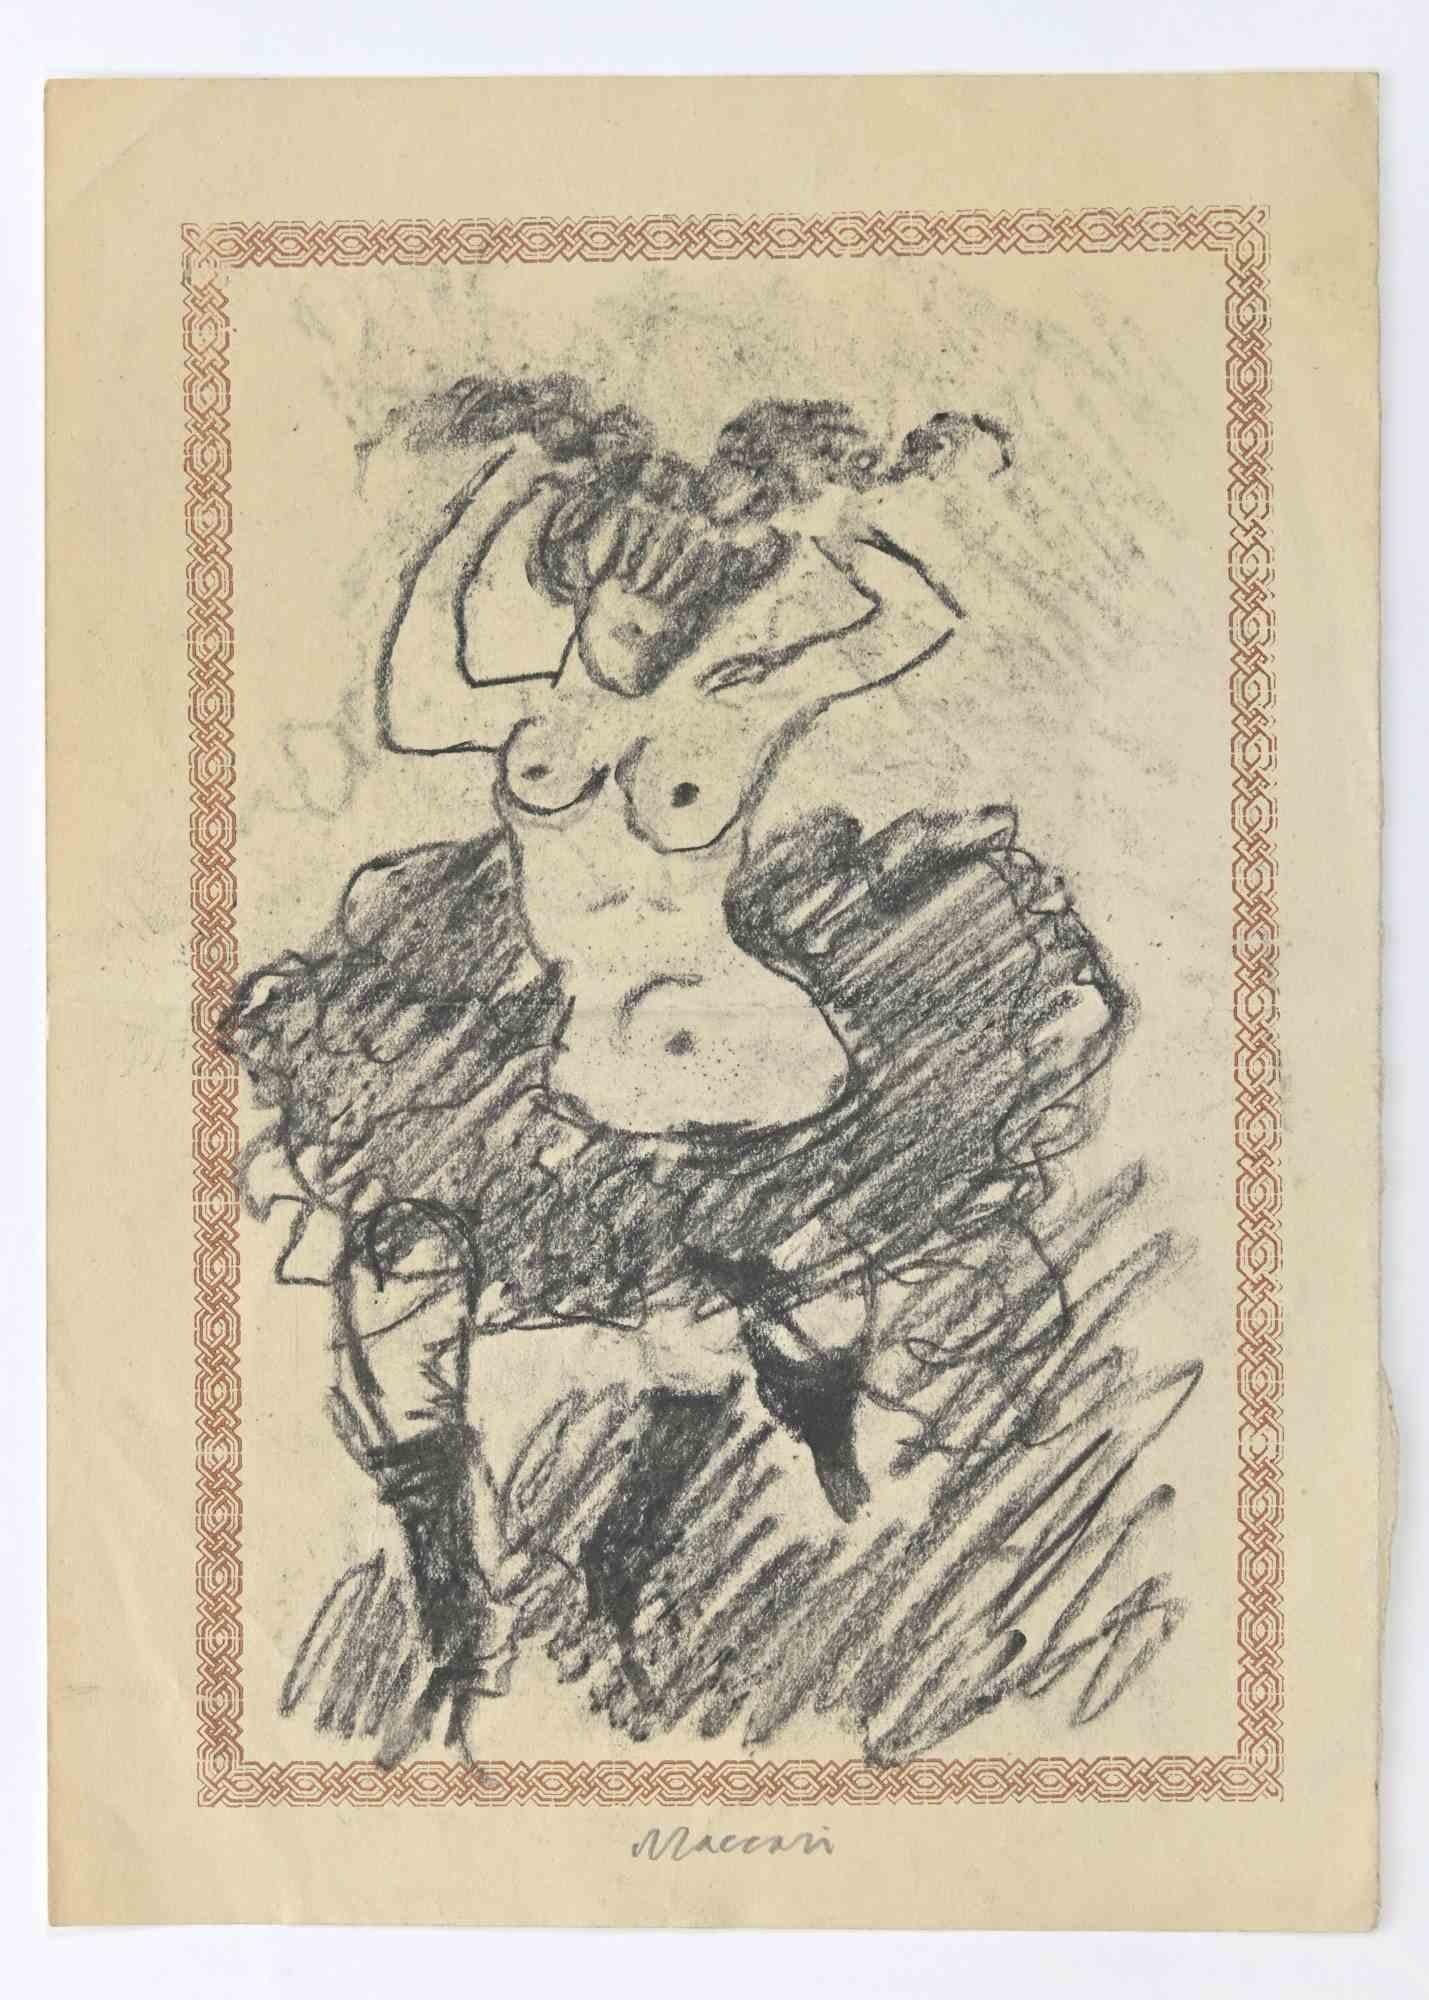 Nude Dancer is a Pencil Drawing realized by Mino Maccari  (1924-1989) in the 1960s.

Hand-signed on the lower with another portrait drawing on the rear.

Good conditions with central folding.

Mino Maccari (Siena, 1924-Rome, June 16, 1989) was an